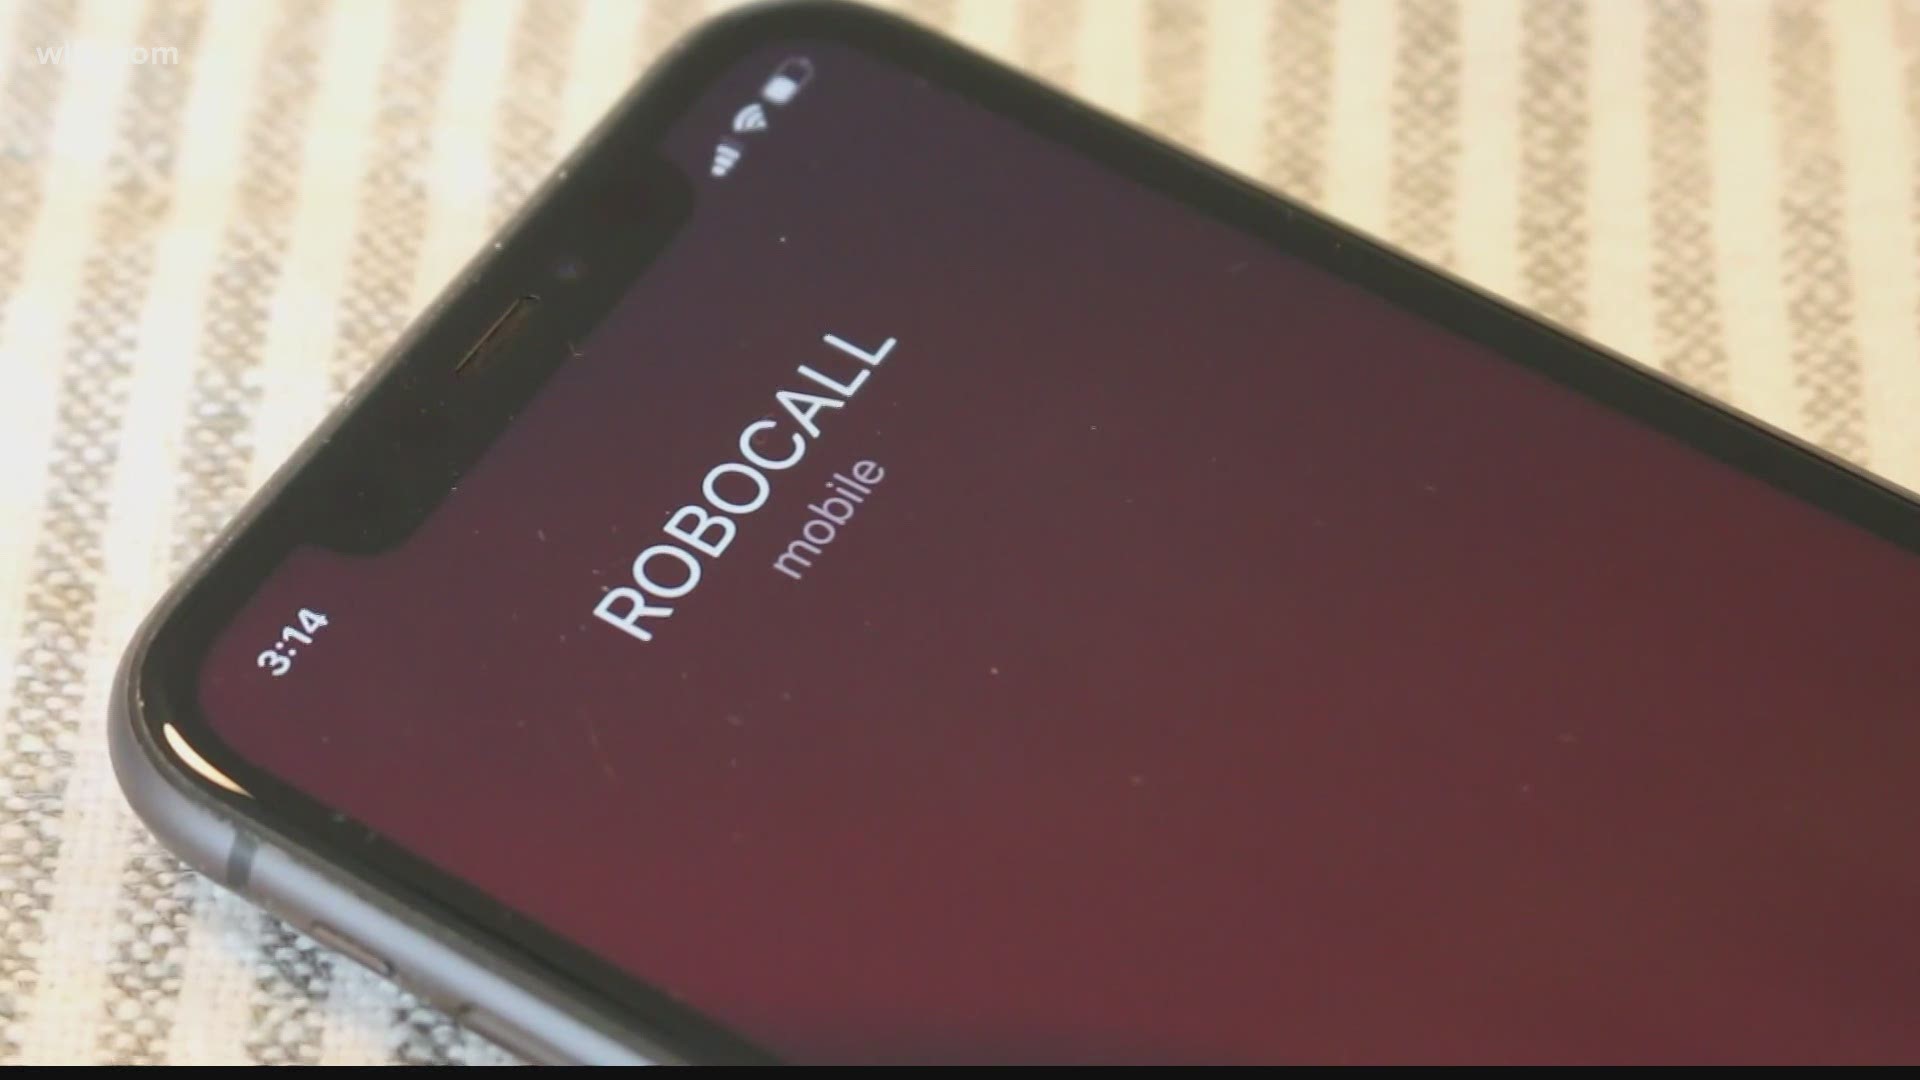 Thanks to a rule in place by the FCC, large telephone providers are implementing software to block illegal robocalls before they reach consumers.